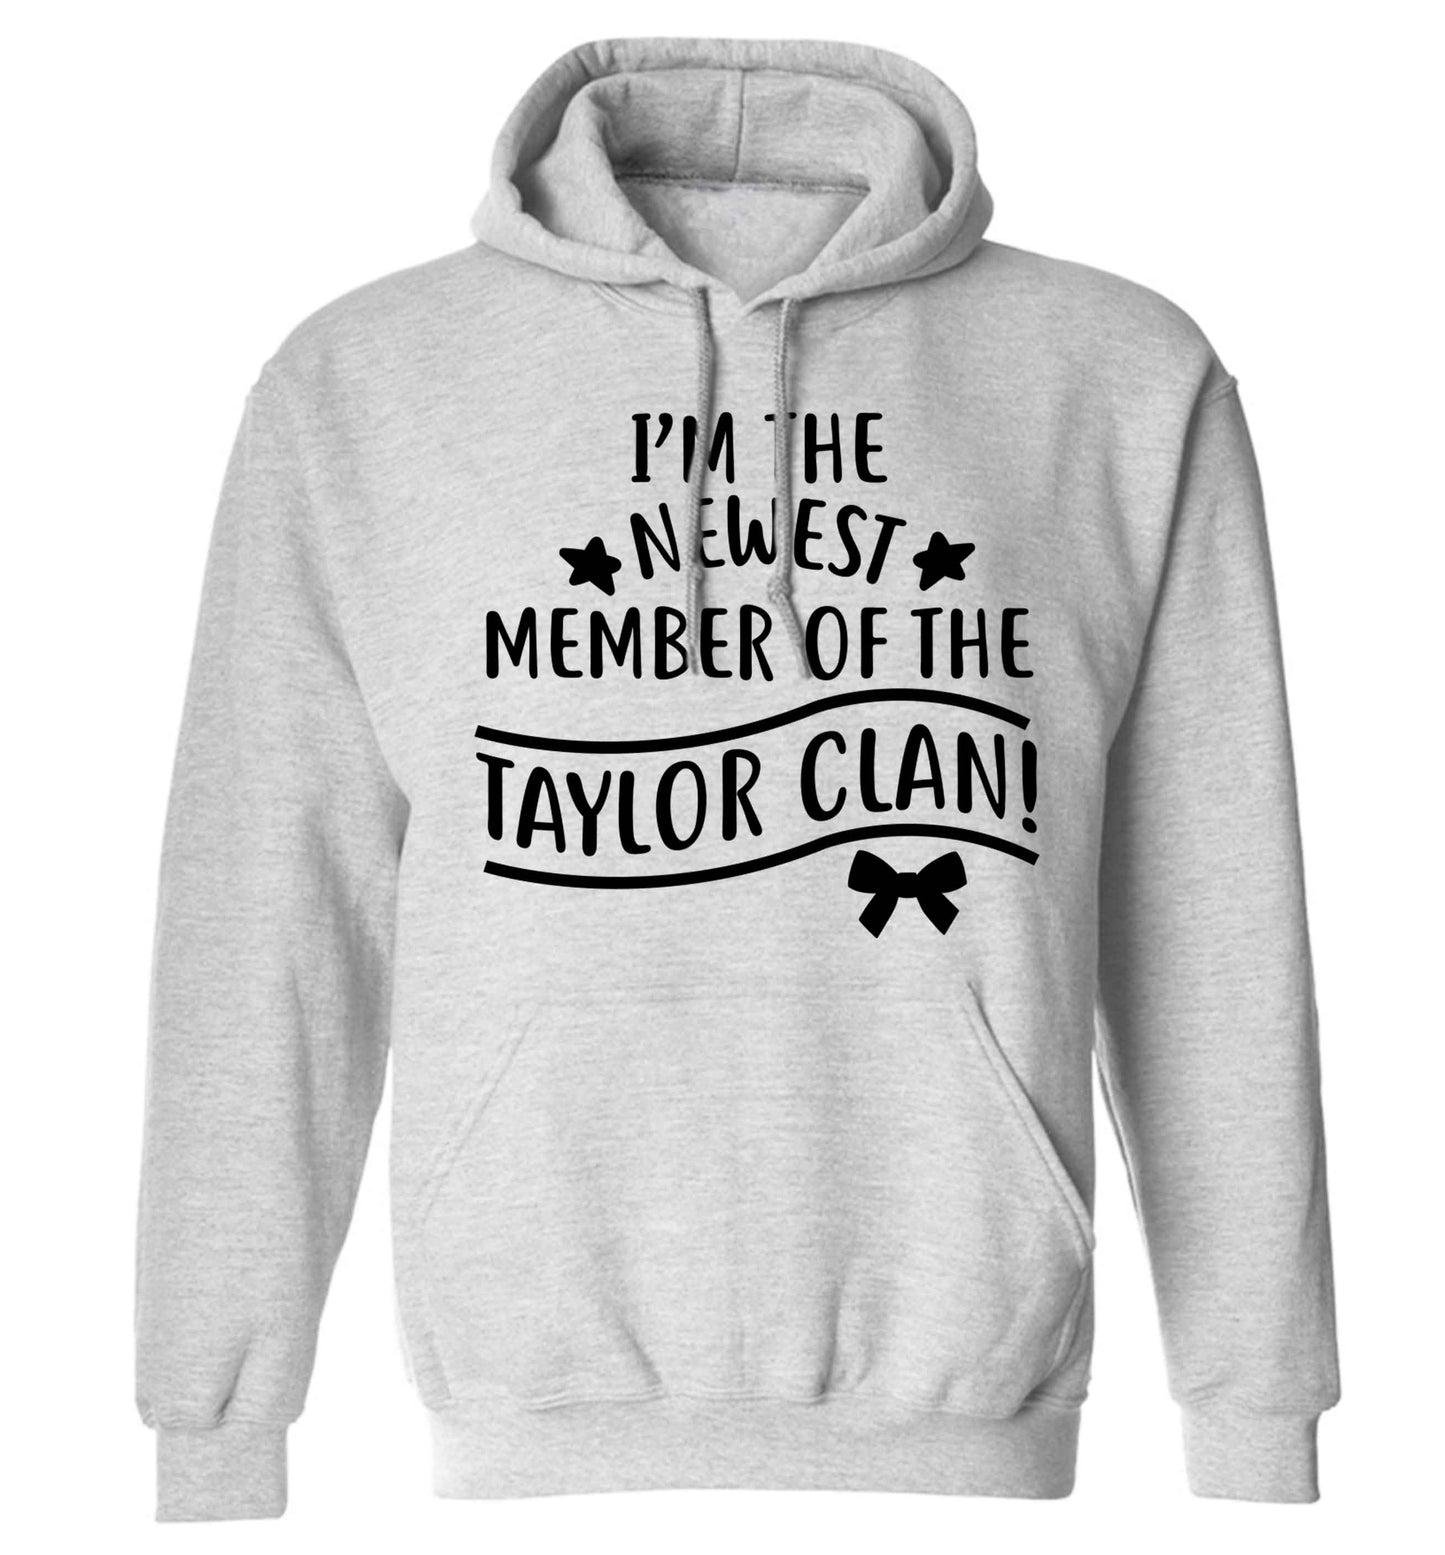 Personalised, newest member of the Taylor clan adults unisex grey hoodie 2XL